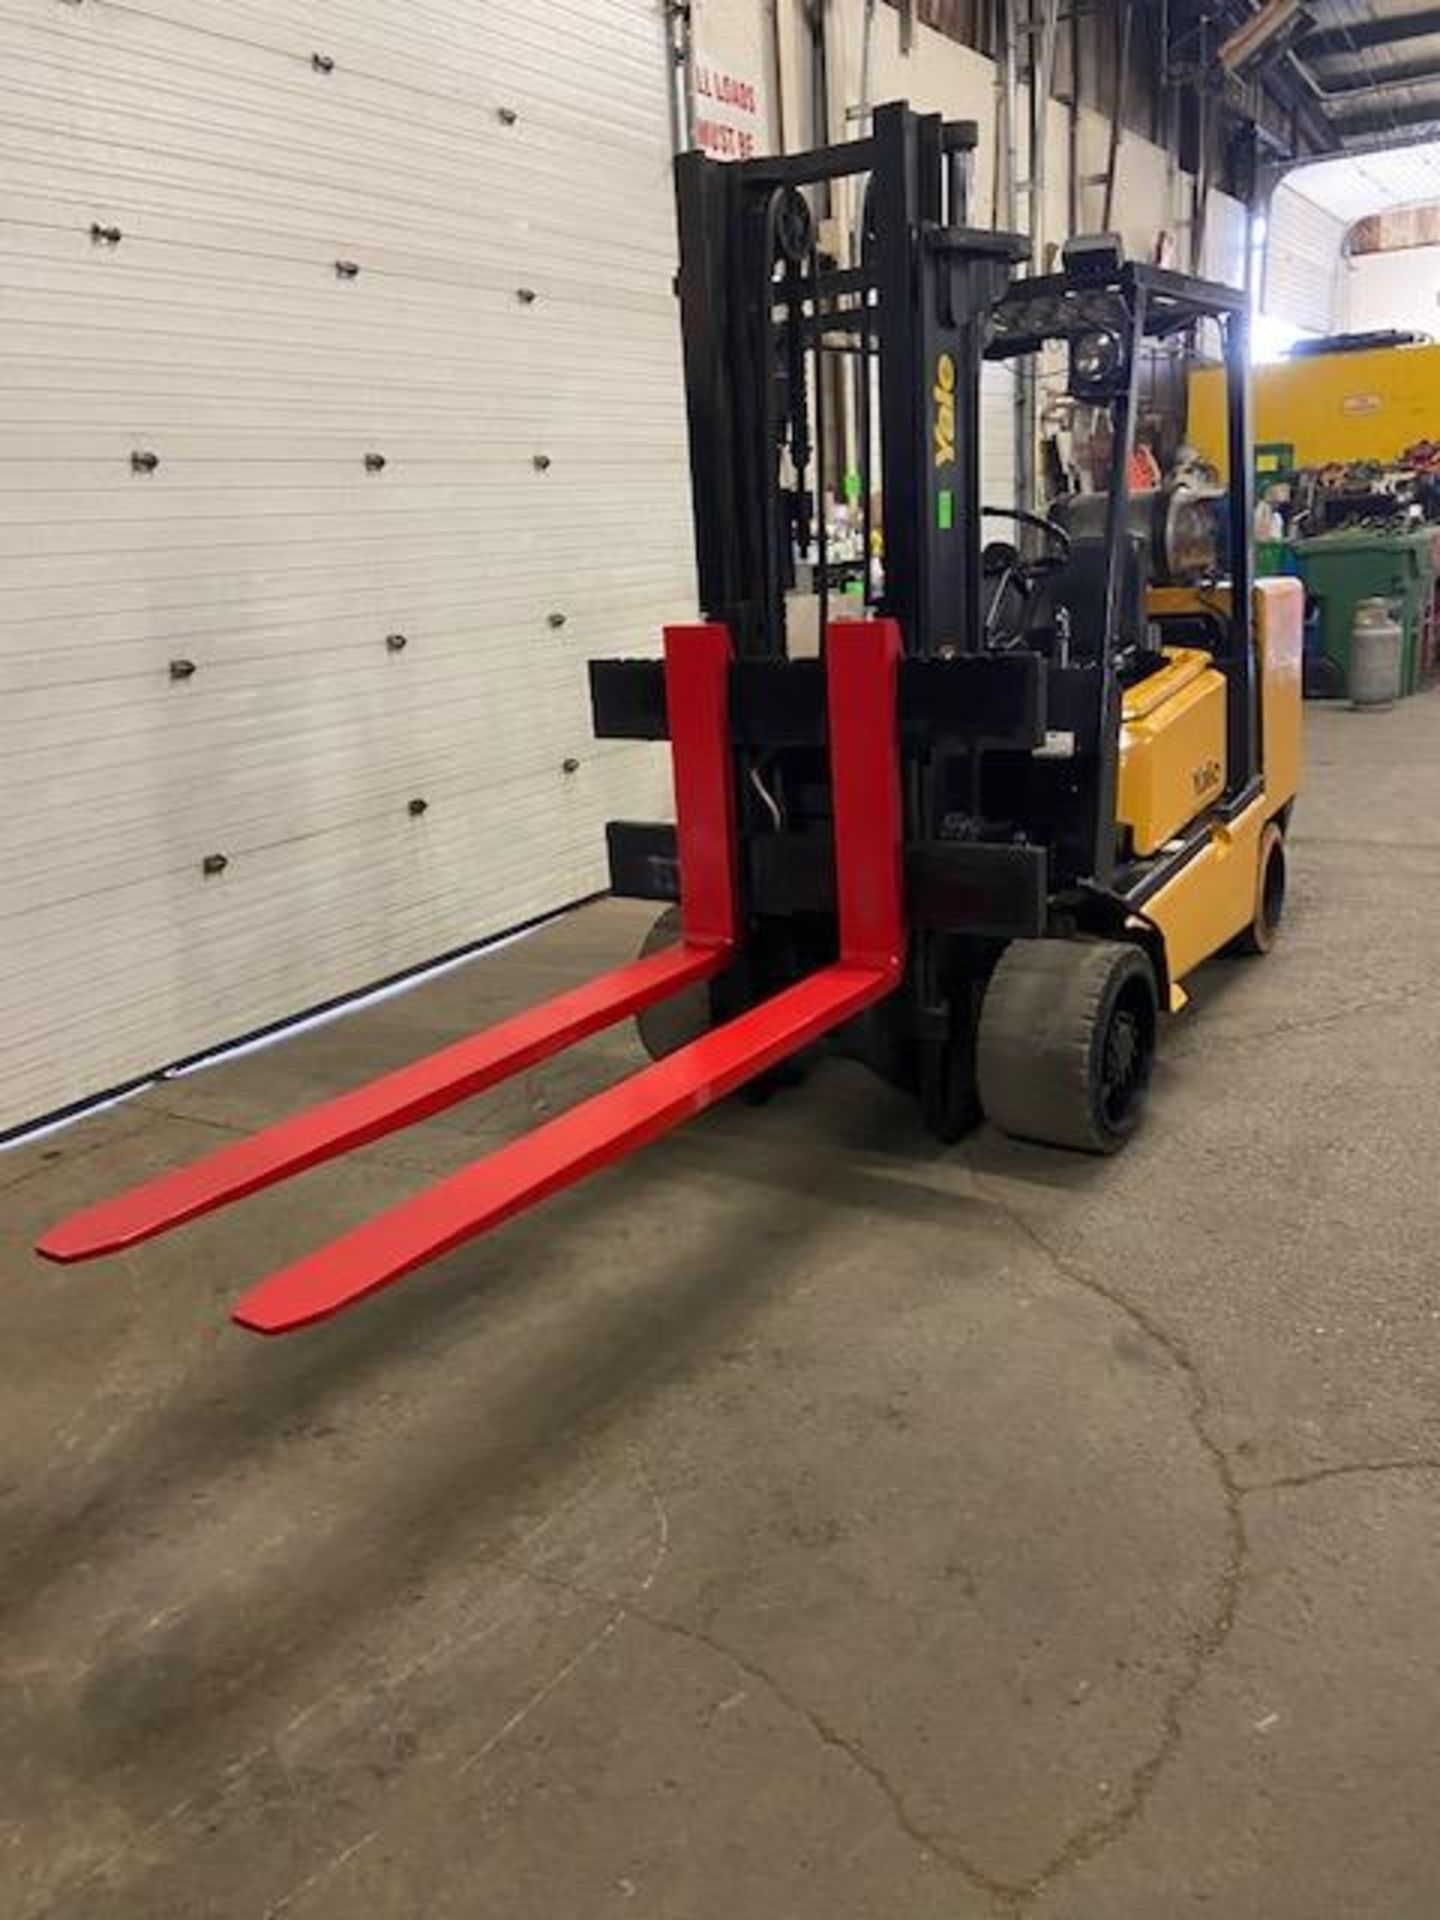 FREE CUSTOMS - Yale 10000lbs Forklift with 72" forks MINT UNIT LPG (propane) (no tank included) - Image 2 of 2